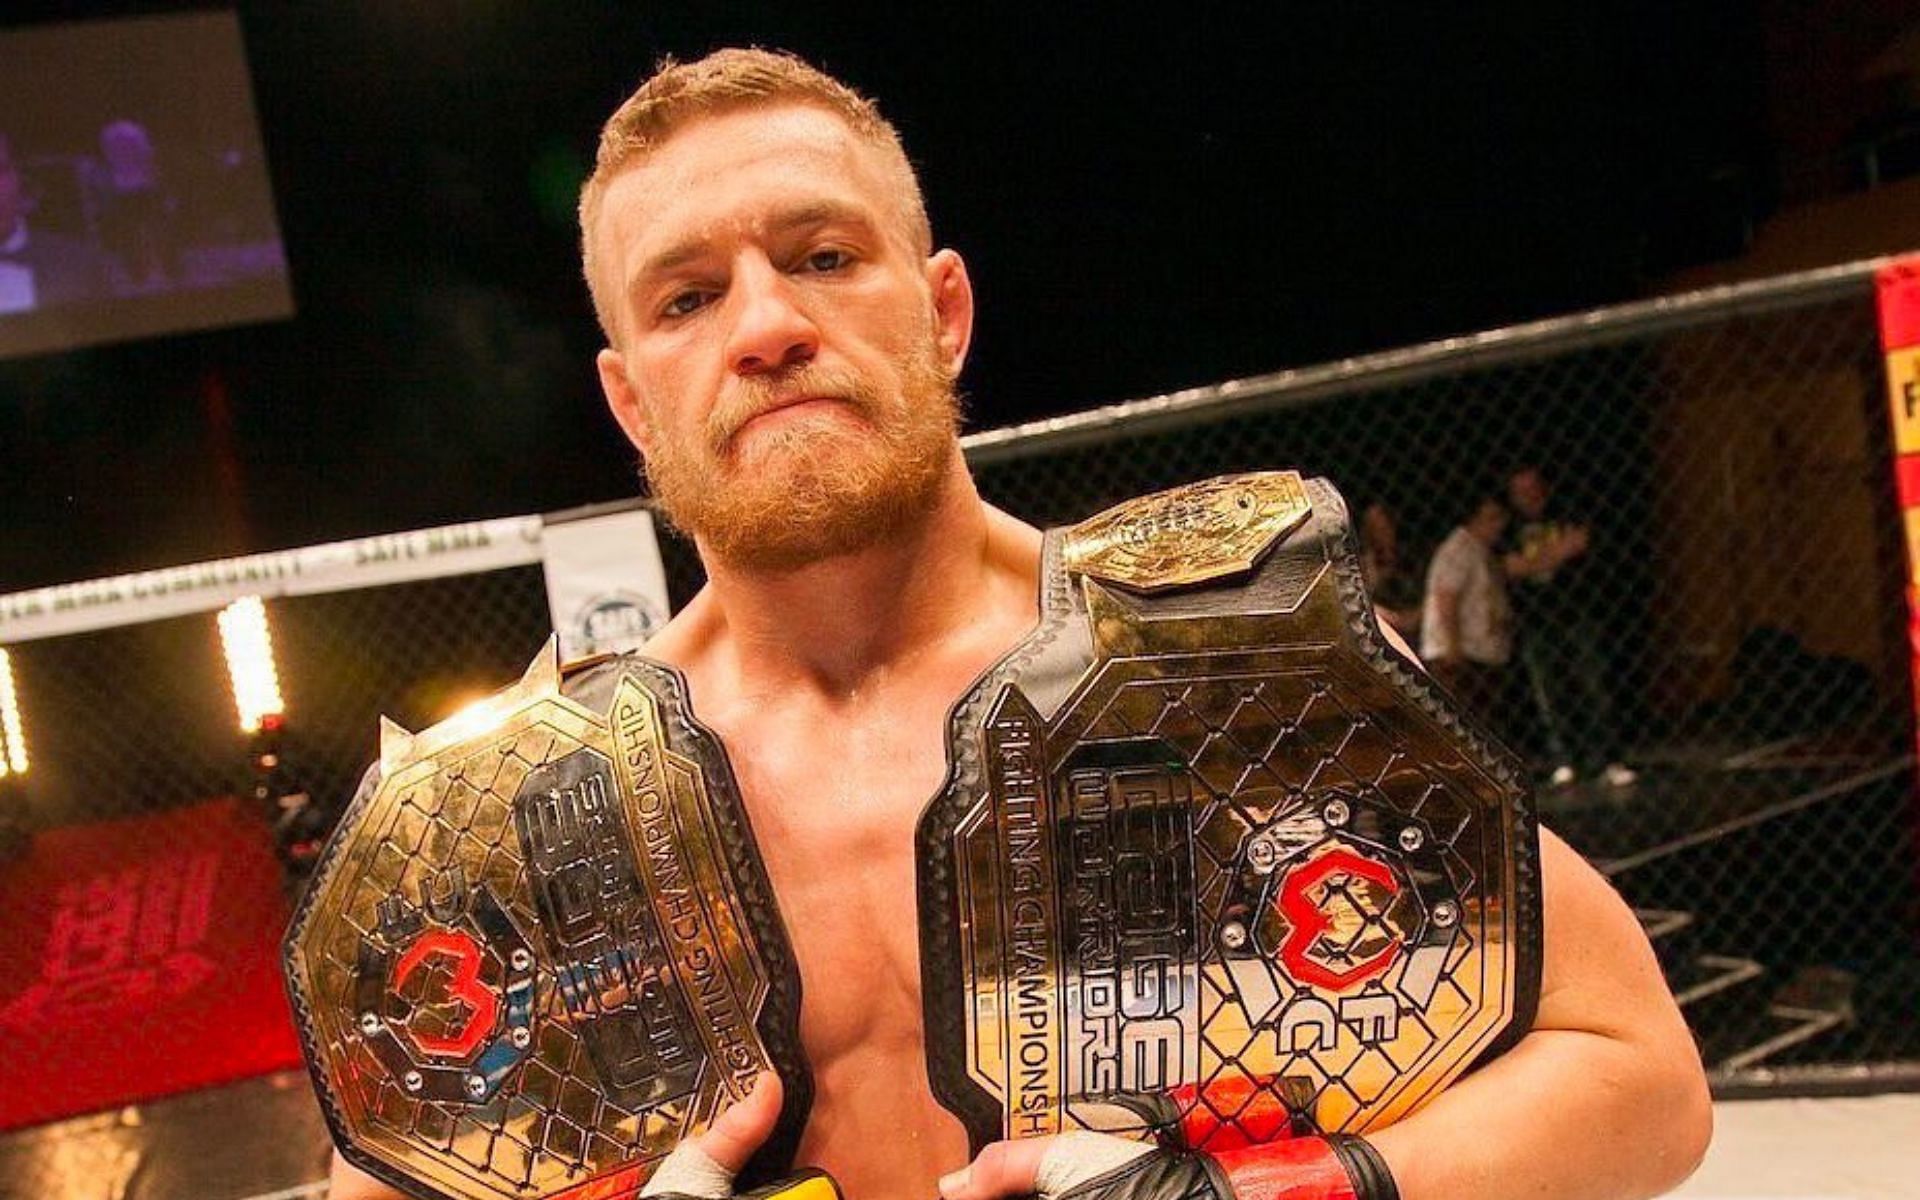 Conor McGregor holding his two Cage Warrior belts (Image courtesy @thenotoriousmma on Instagram)